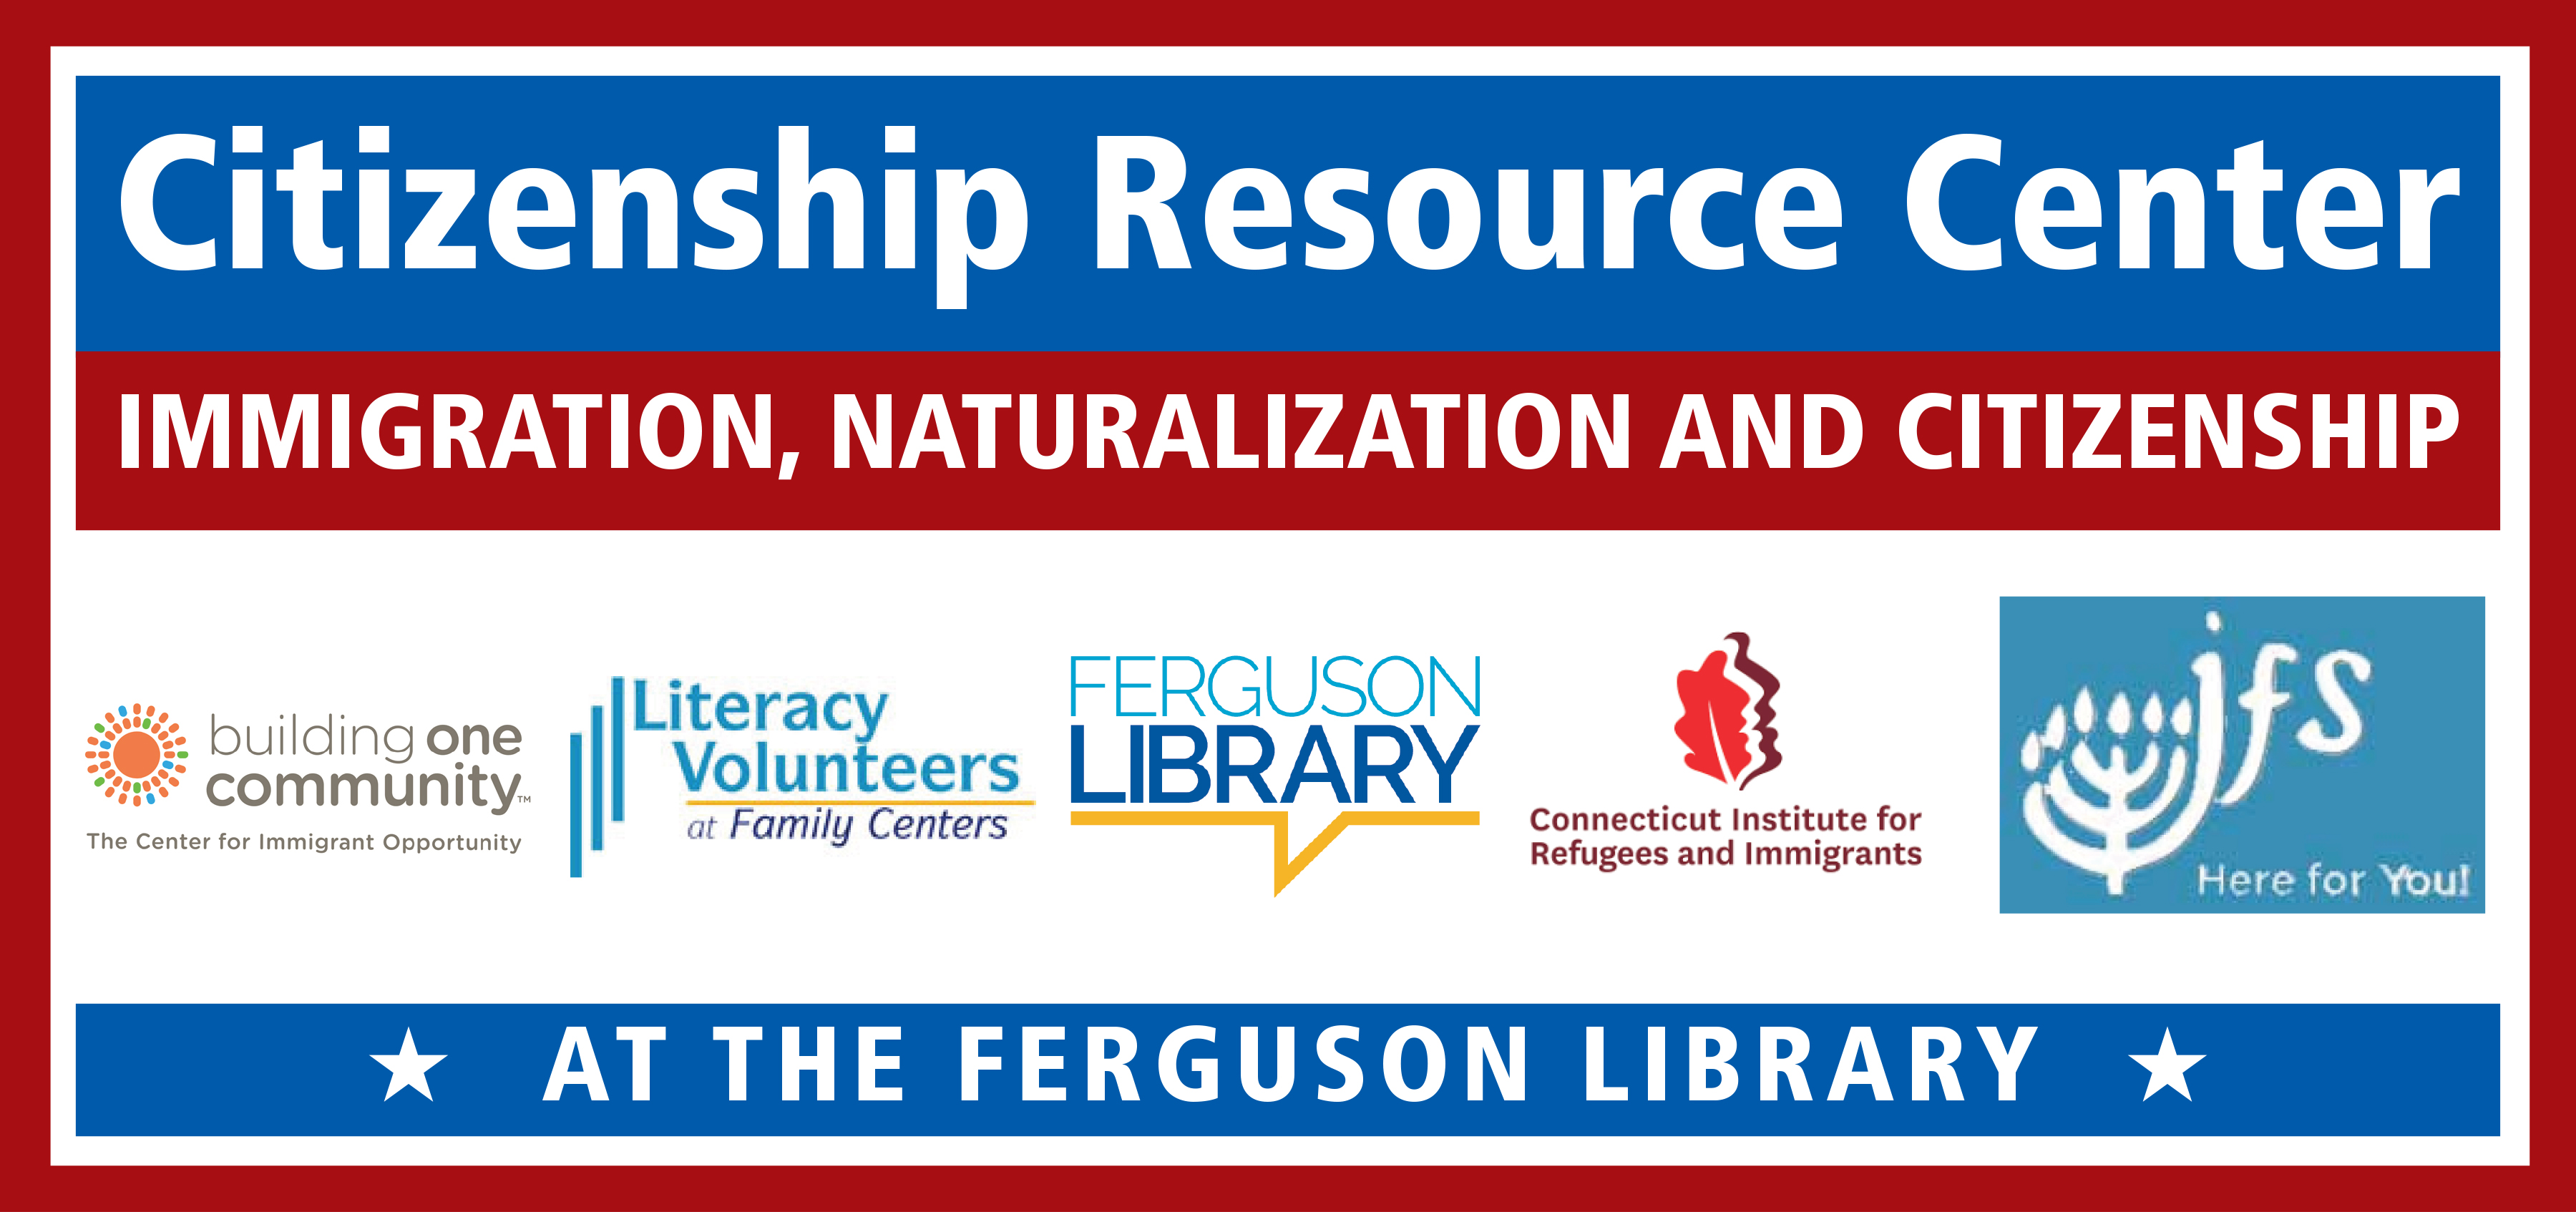 Citizen Resource Center banner that reads, "Immigration, Naturalization and Citizenship at the Ferguson Library" with logos from various sponsors